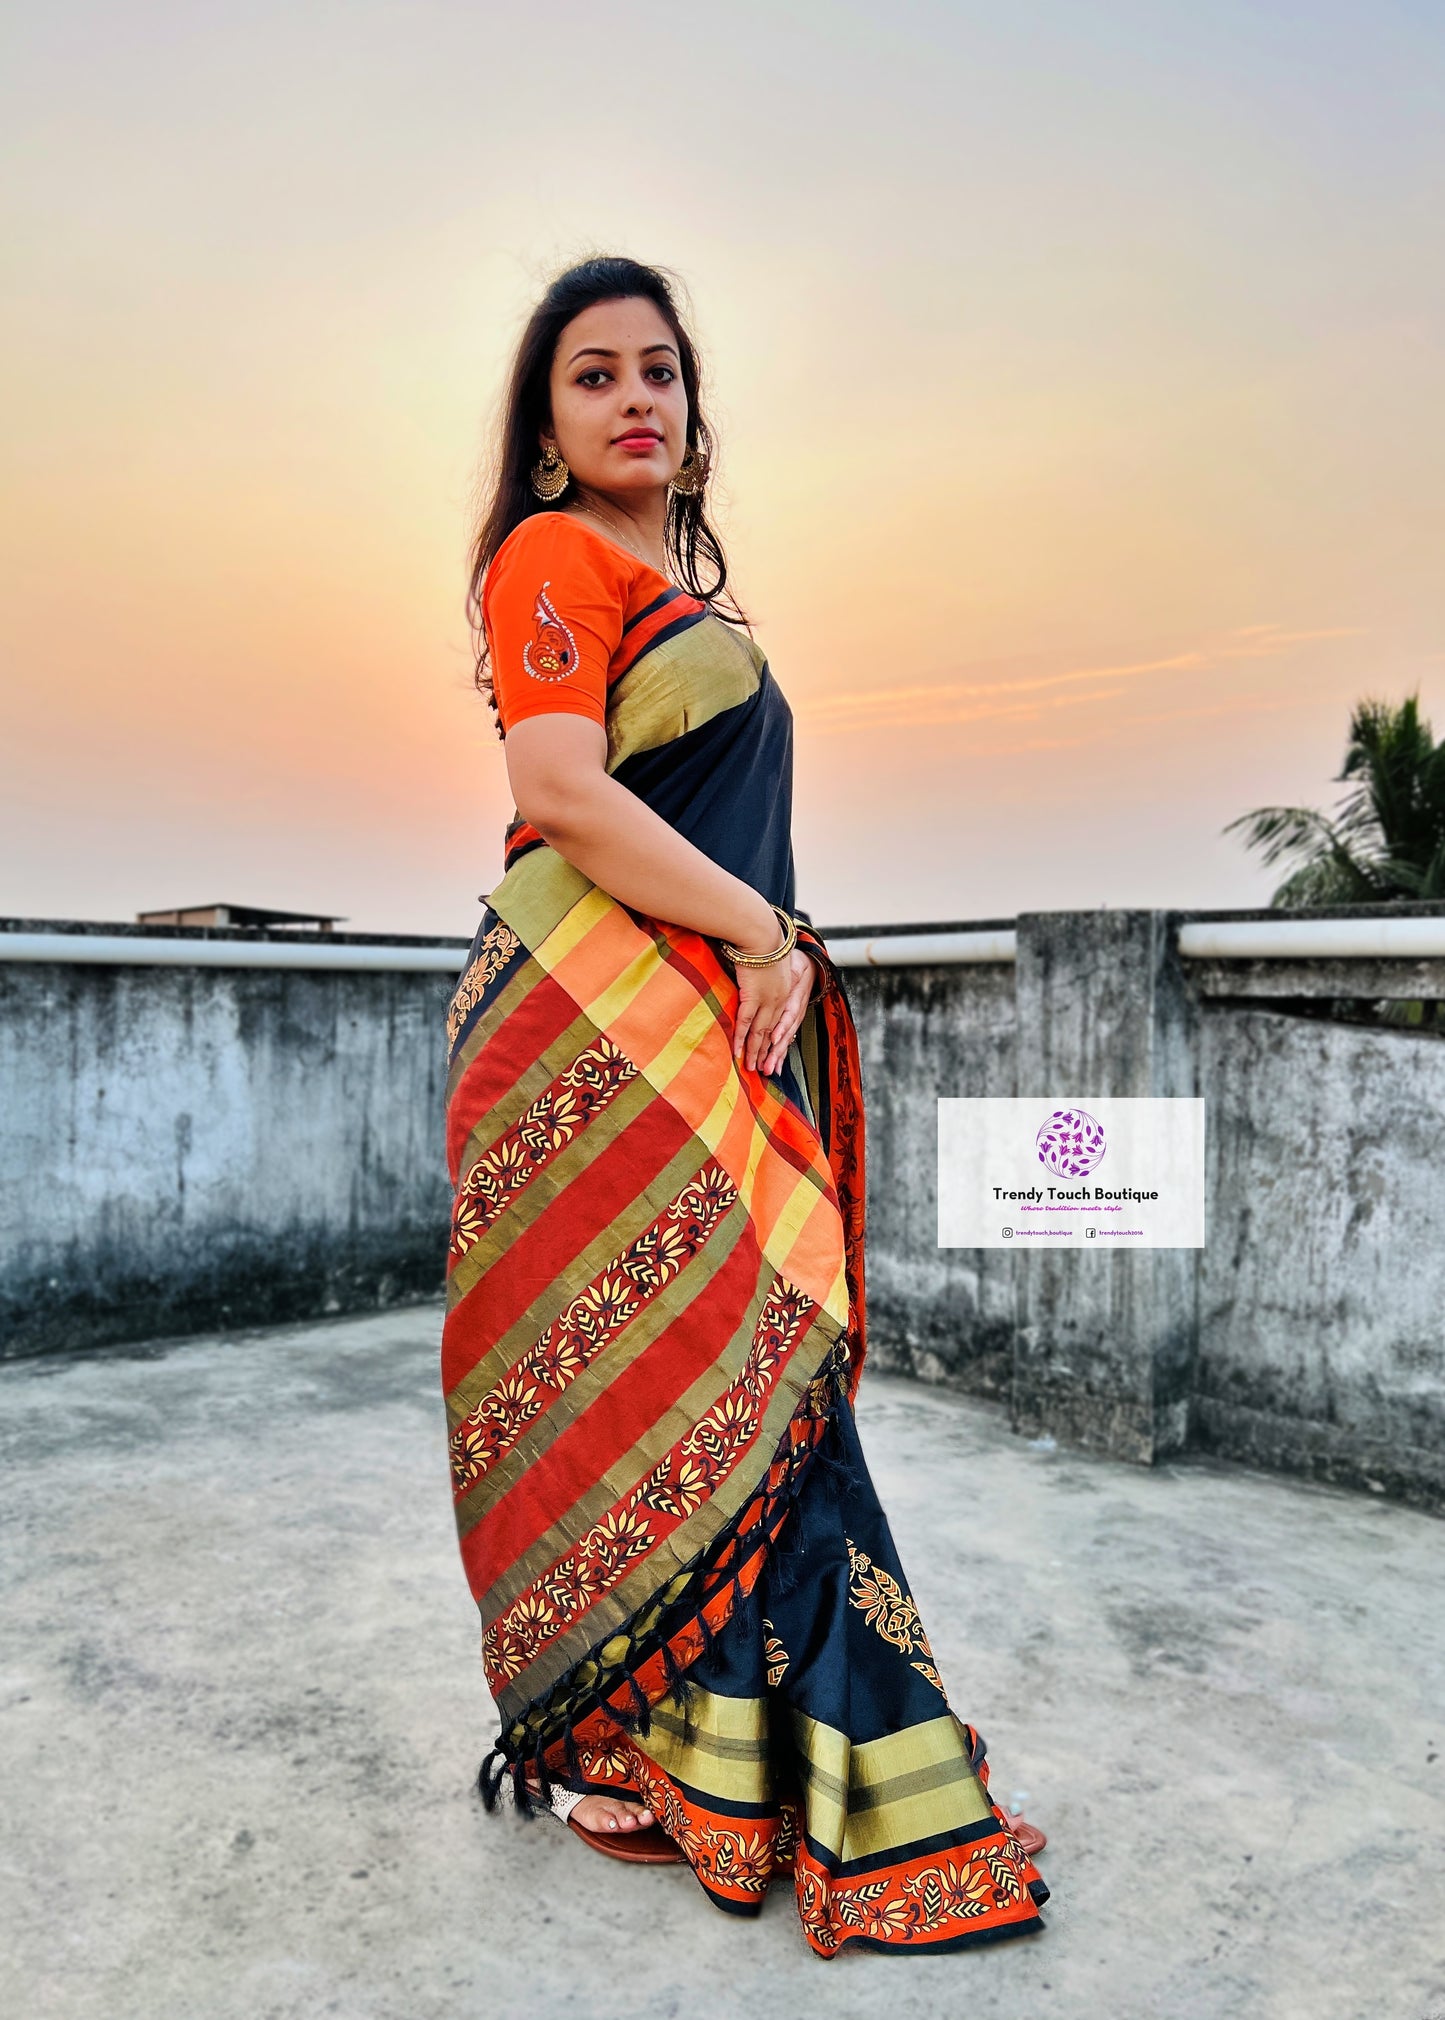 DUSK MODE - HAND PAINTED FLORAL WORK - COTTON SILK - MADE TO ORDER